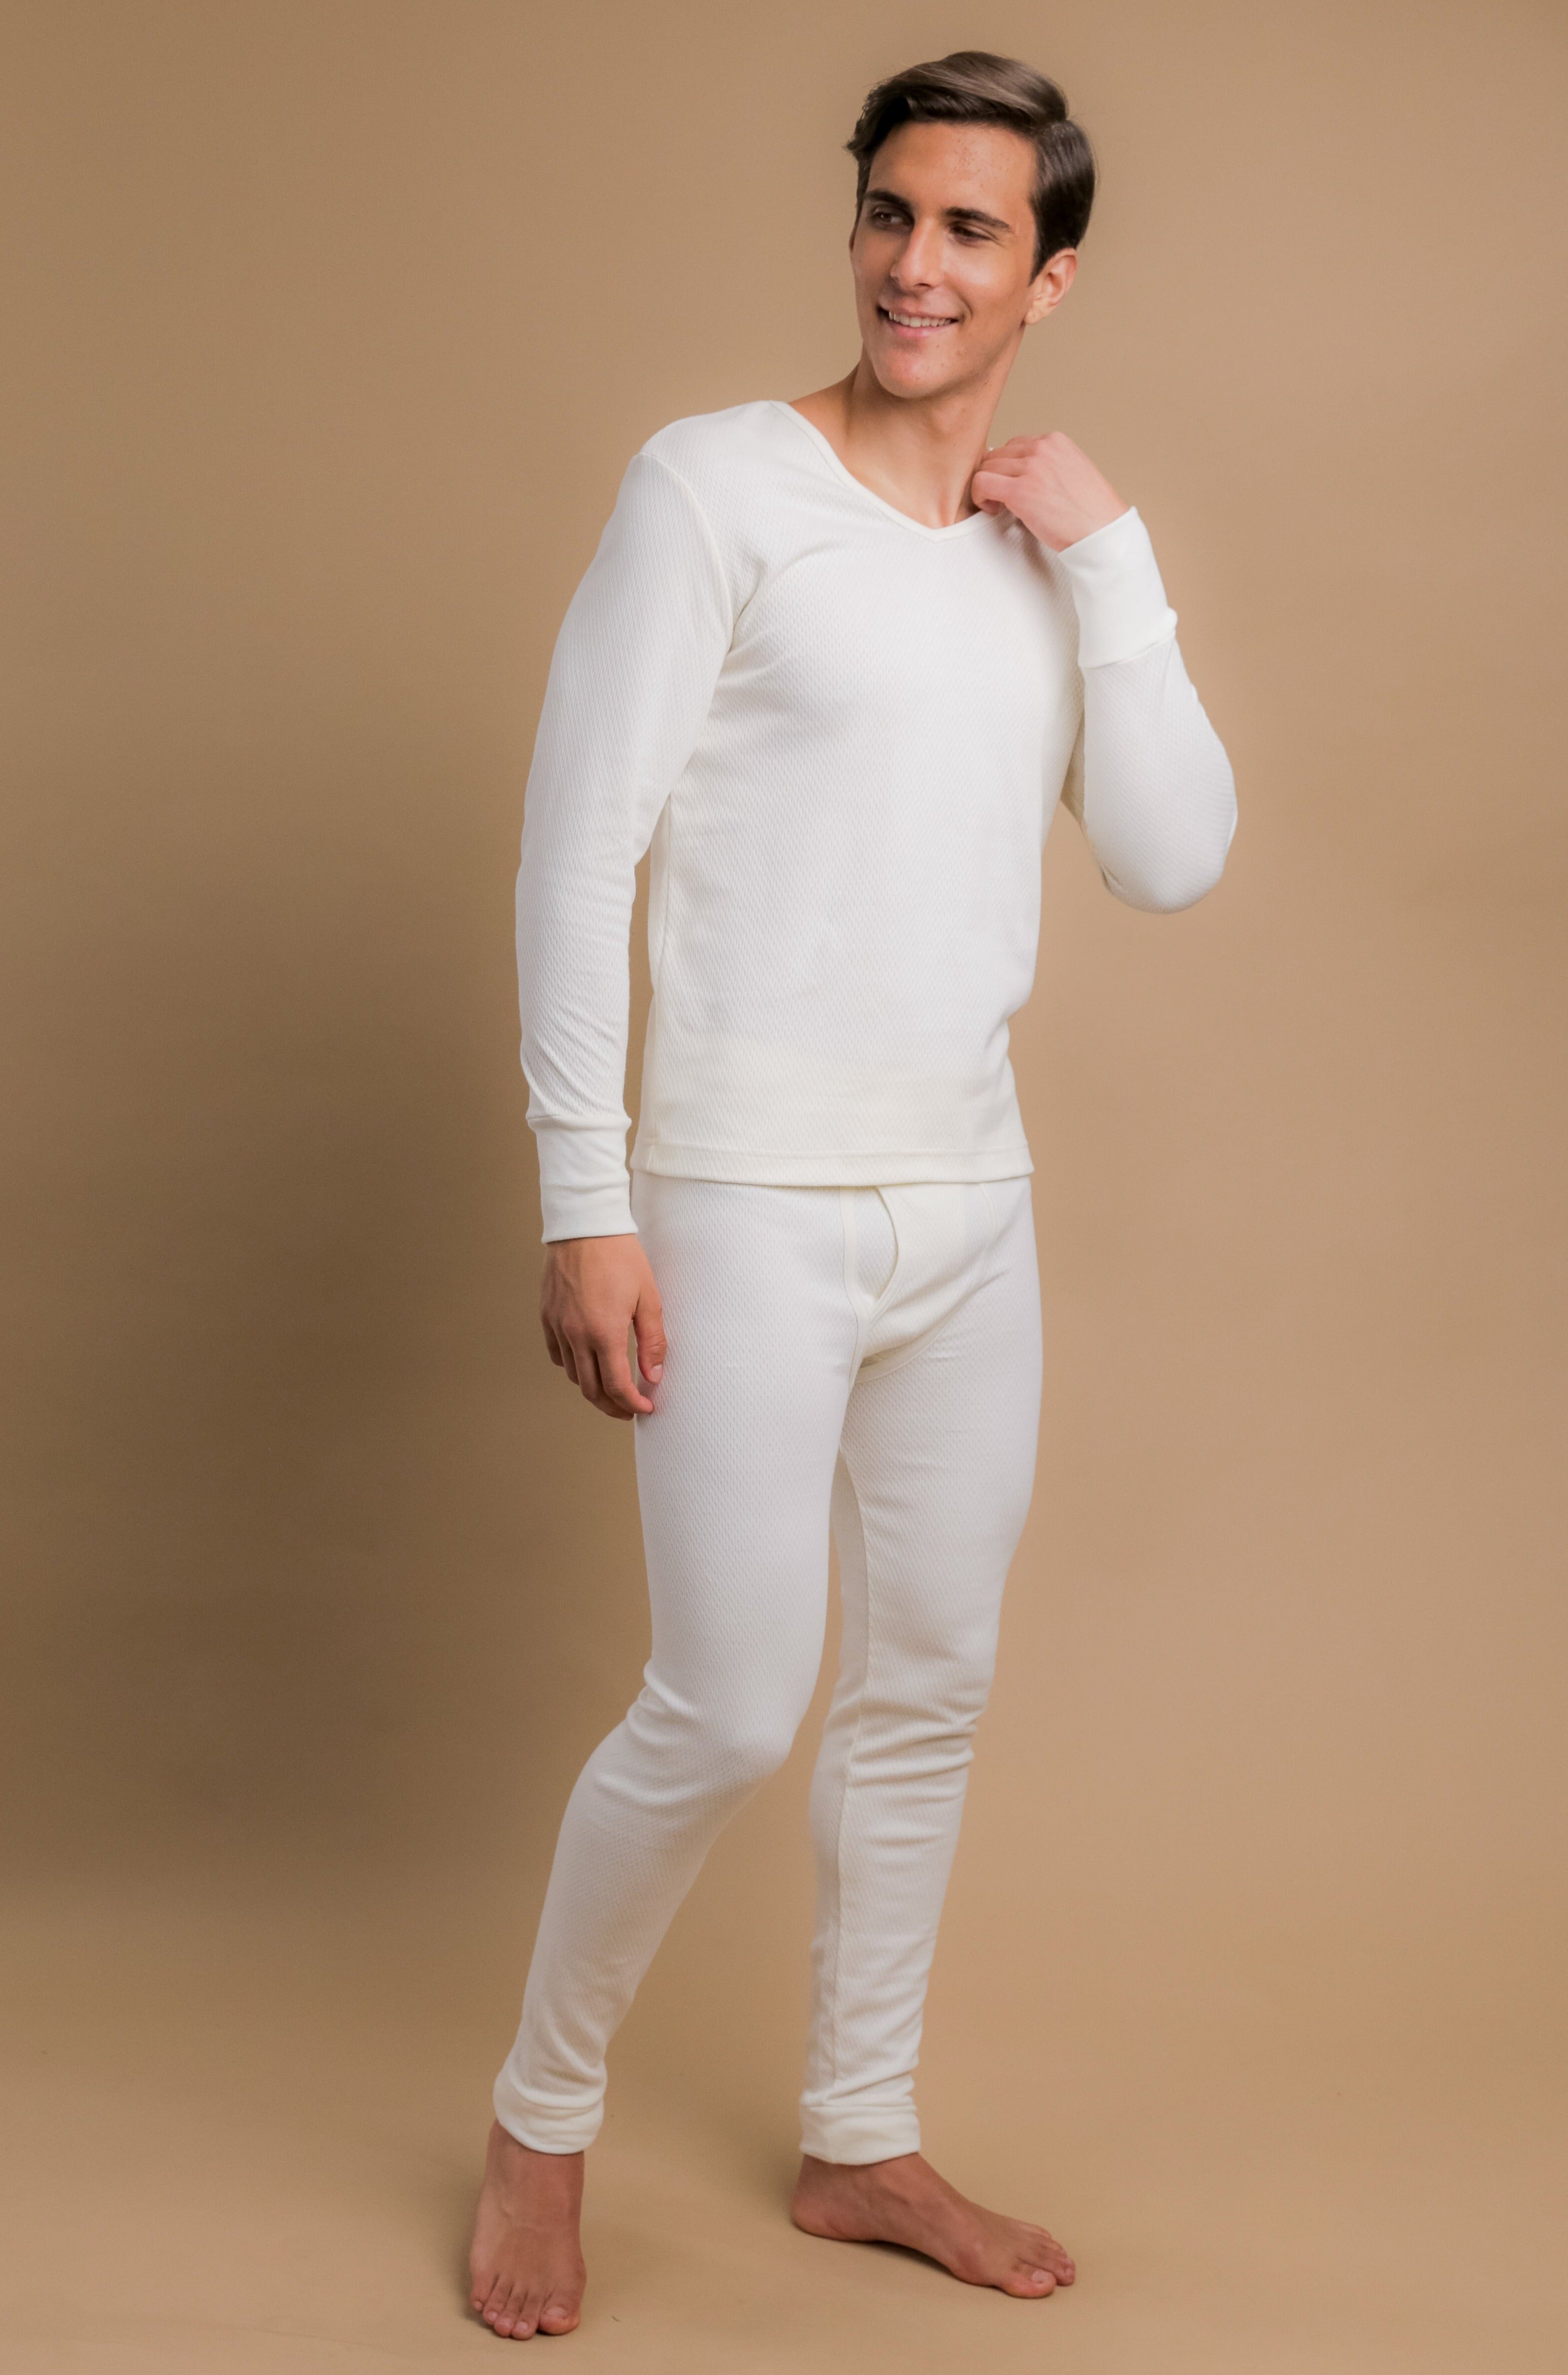 USGI Issue Extreme Cold Weather Thermal Long Underwear 100% Cotton IRR  Large